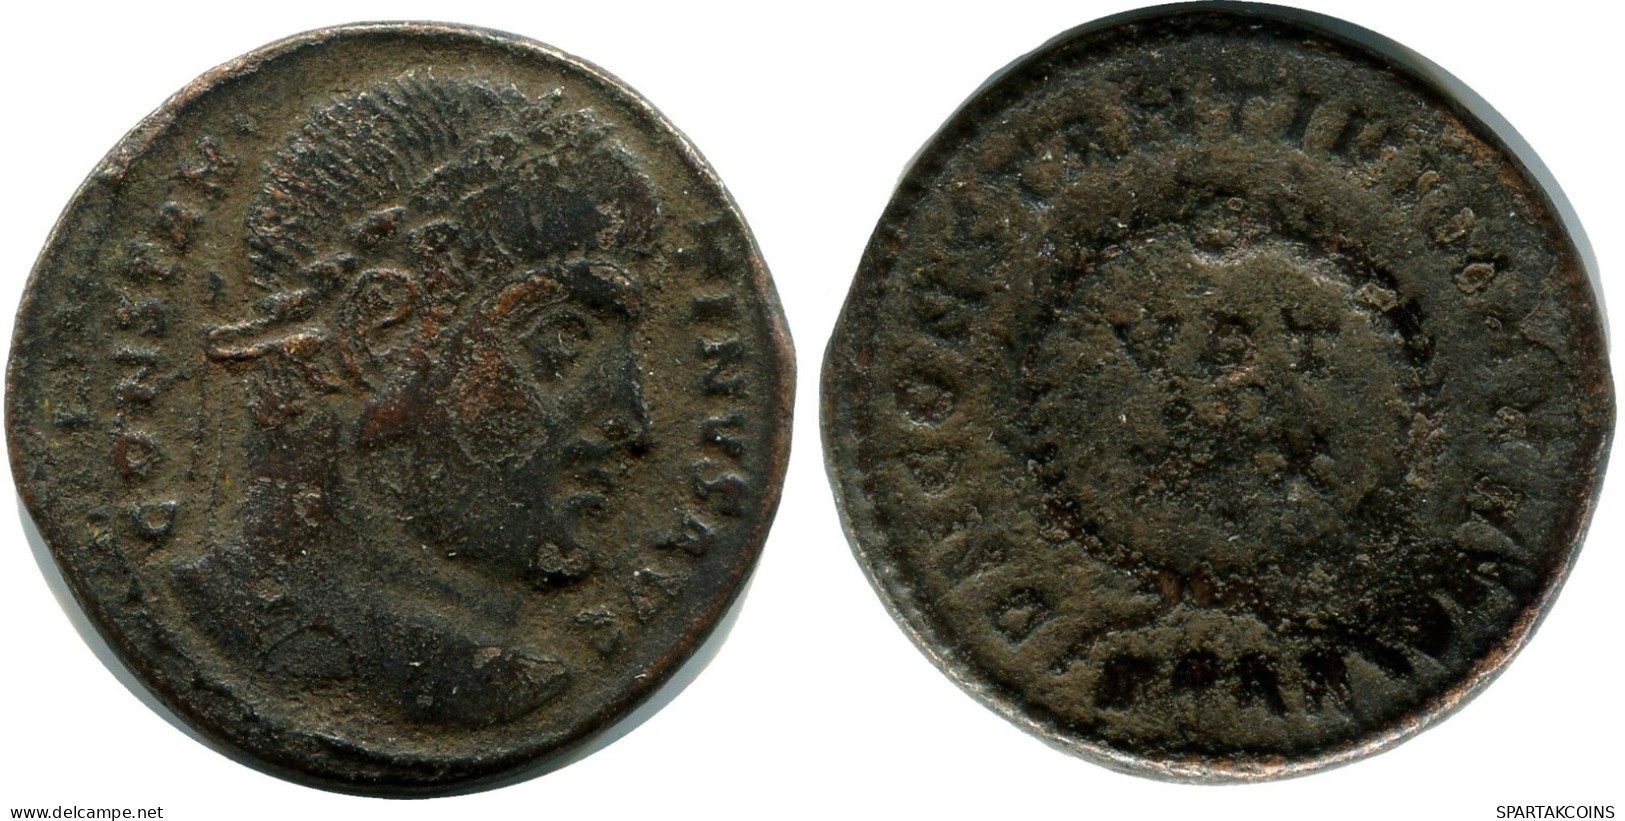 CONSTANTINE I MINTED IN HERACLEA FOUND IN IHNASYAH HOARD EGYPT #ANC11216.14.U.A - El Imperio Christiano (307 / 363)